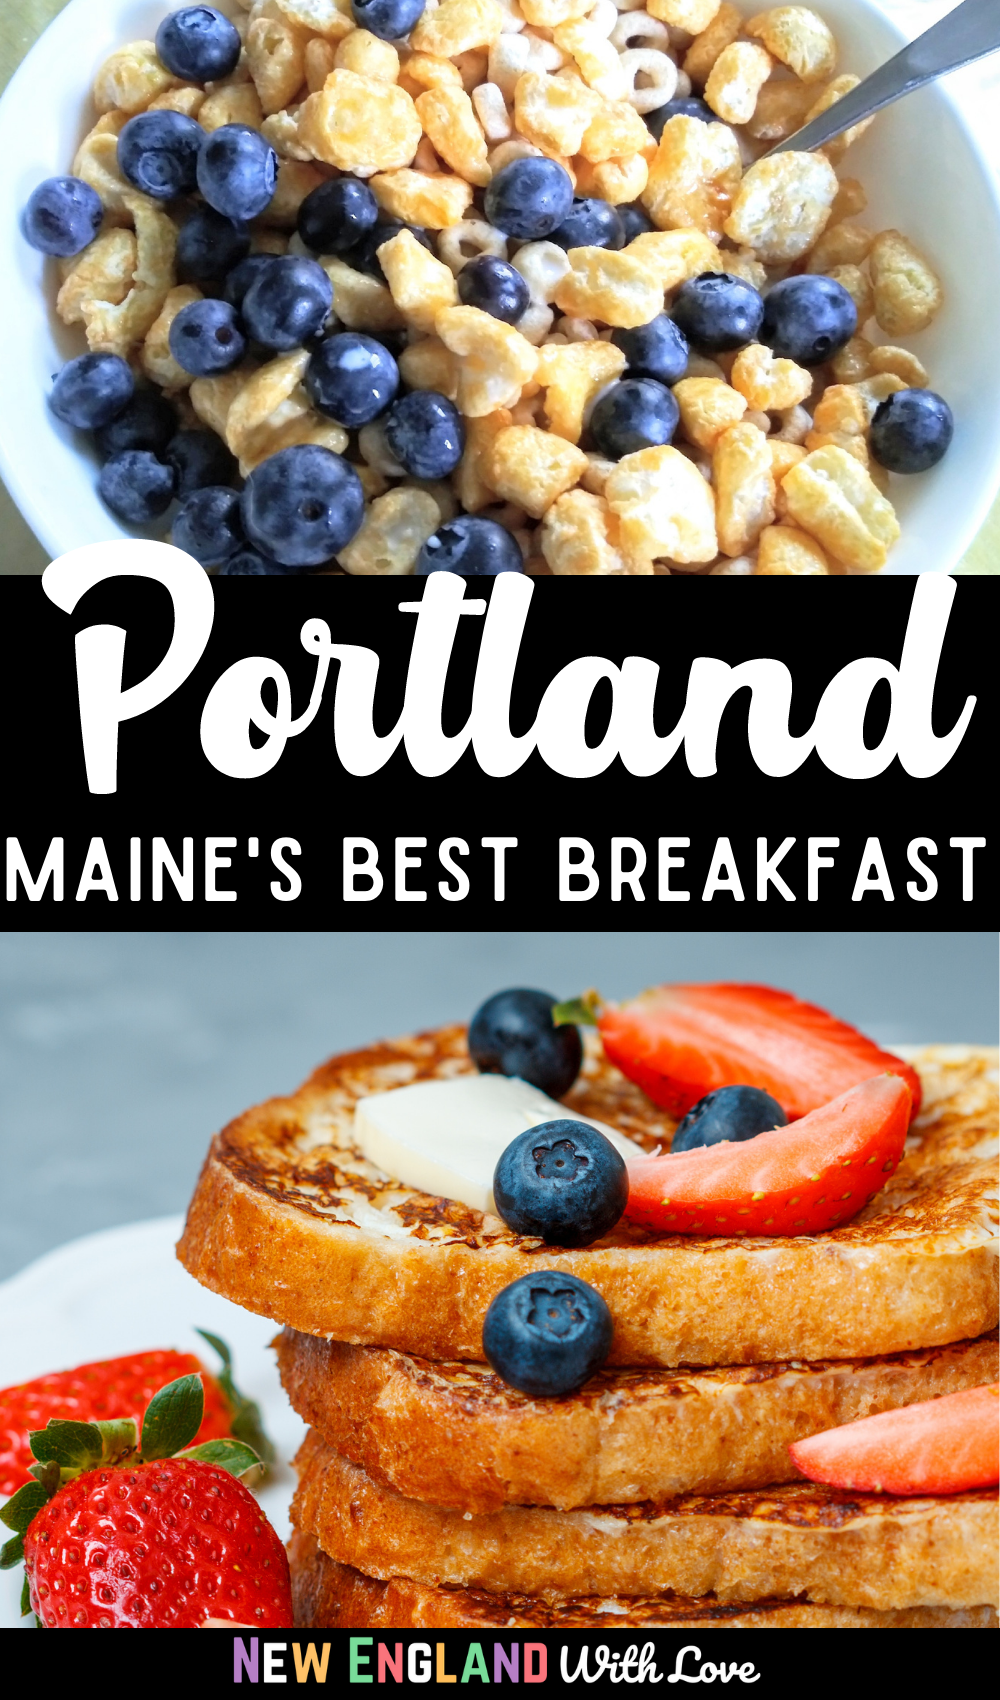 Pinterest graphic that says "Portland Maine's Best Breakfast" with blueberries and cereal in top picture, and blueberries and strawberries on french toast in bottom picture